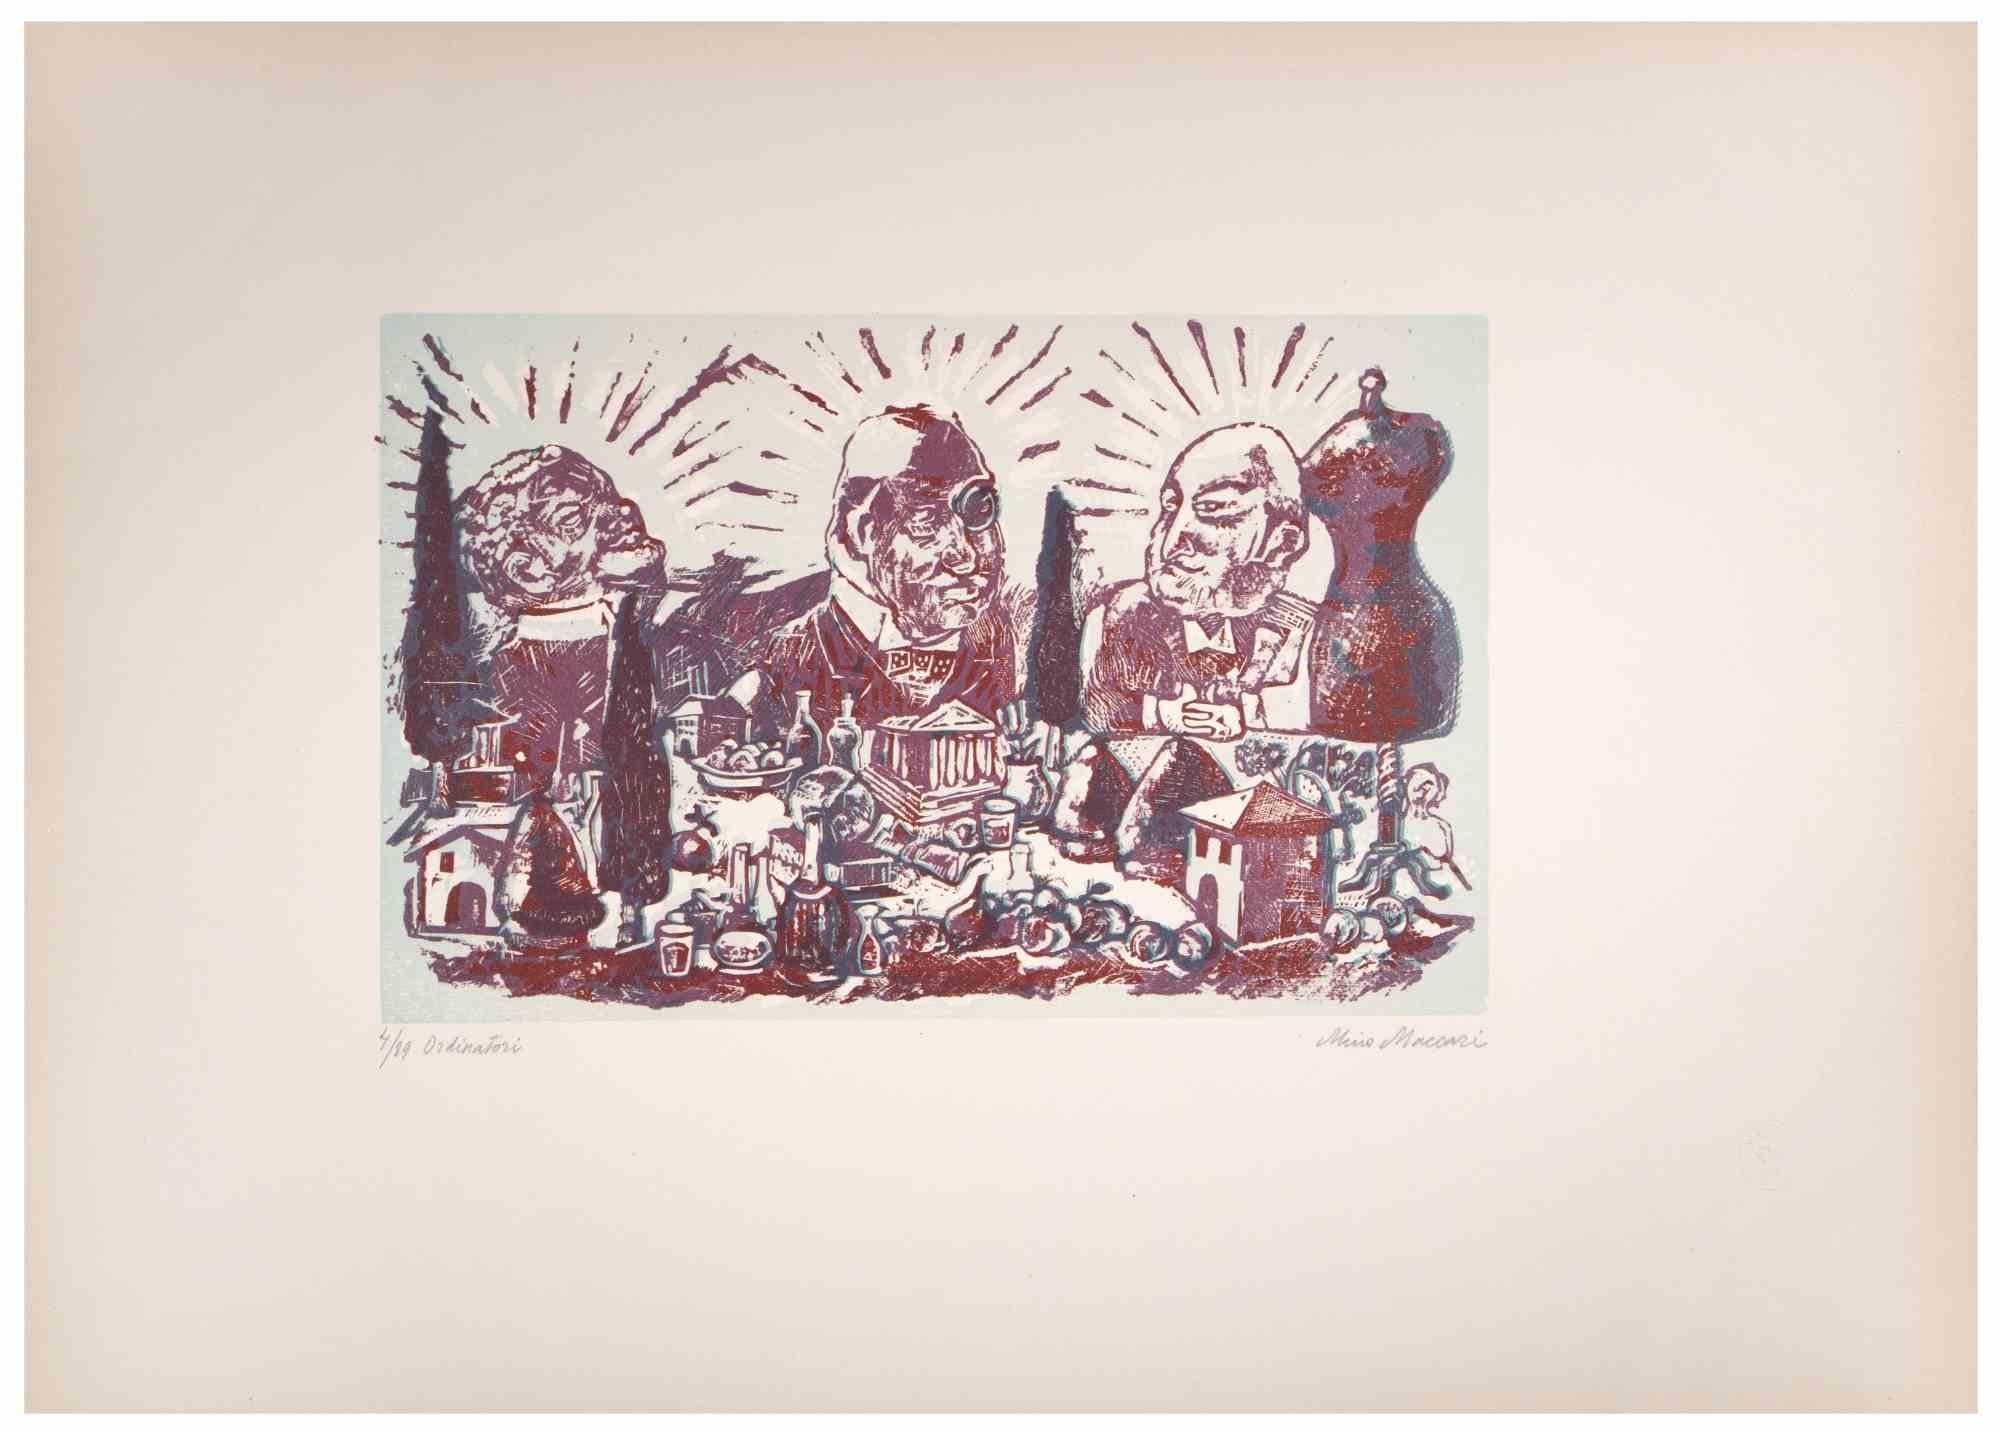 Authorising Officers (Ordinatori) is an Artwork realized by Mino Maccari  (1924-1989) in the Mid-20th Century.

Colored woodcut on paper. Hand-signed on the lower, numbered 4/89 specimens and titled on the left margin.

Good conditions.

Mino